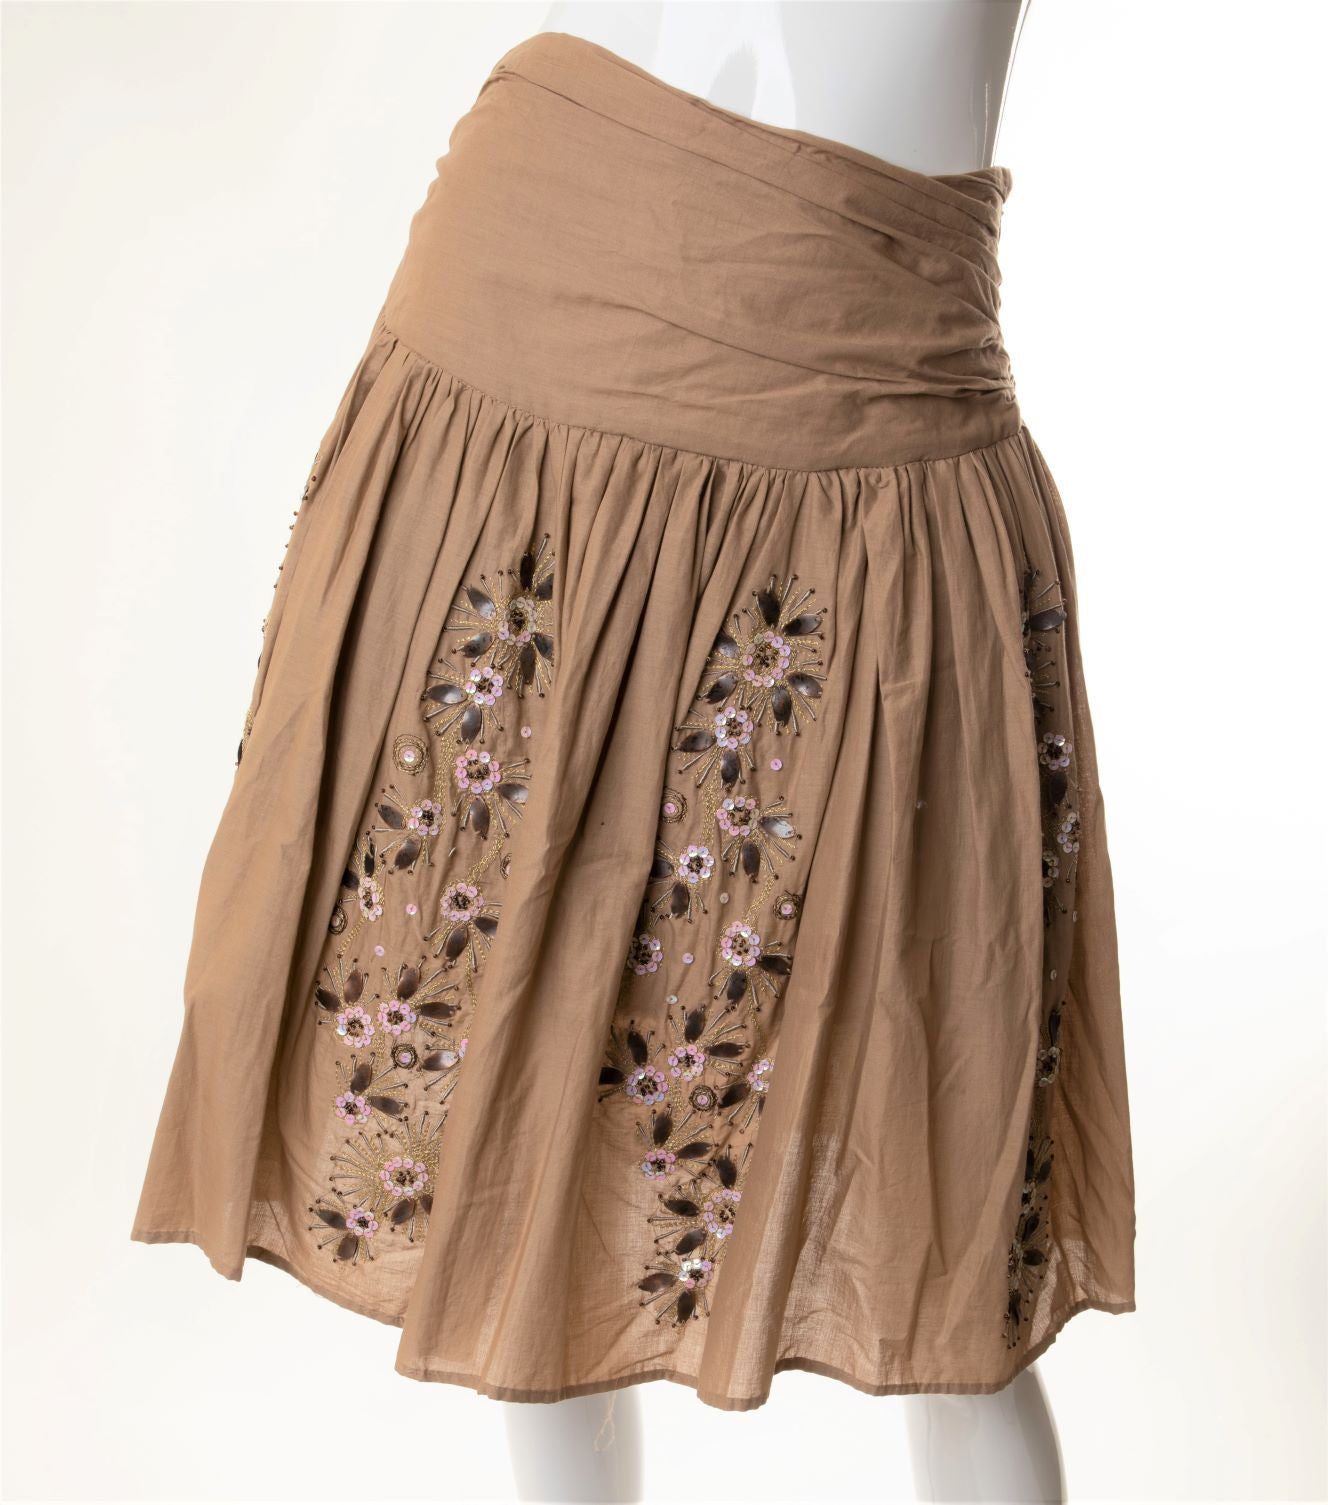 Vintage - Cotton Voile Skirt with Sequined Embellishment